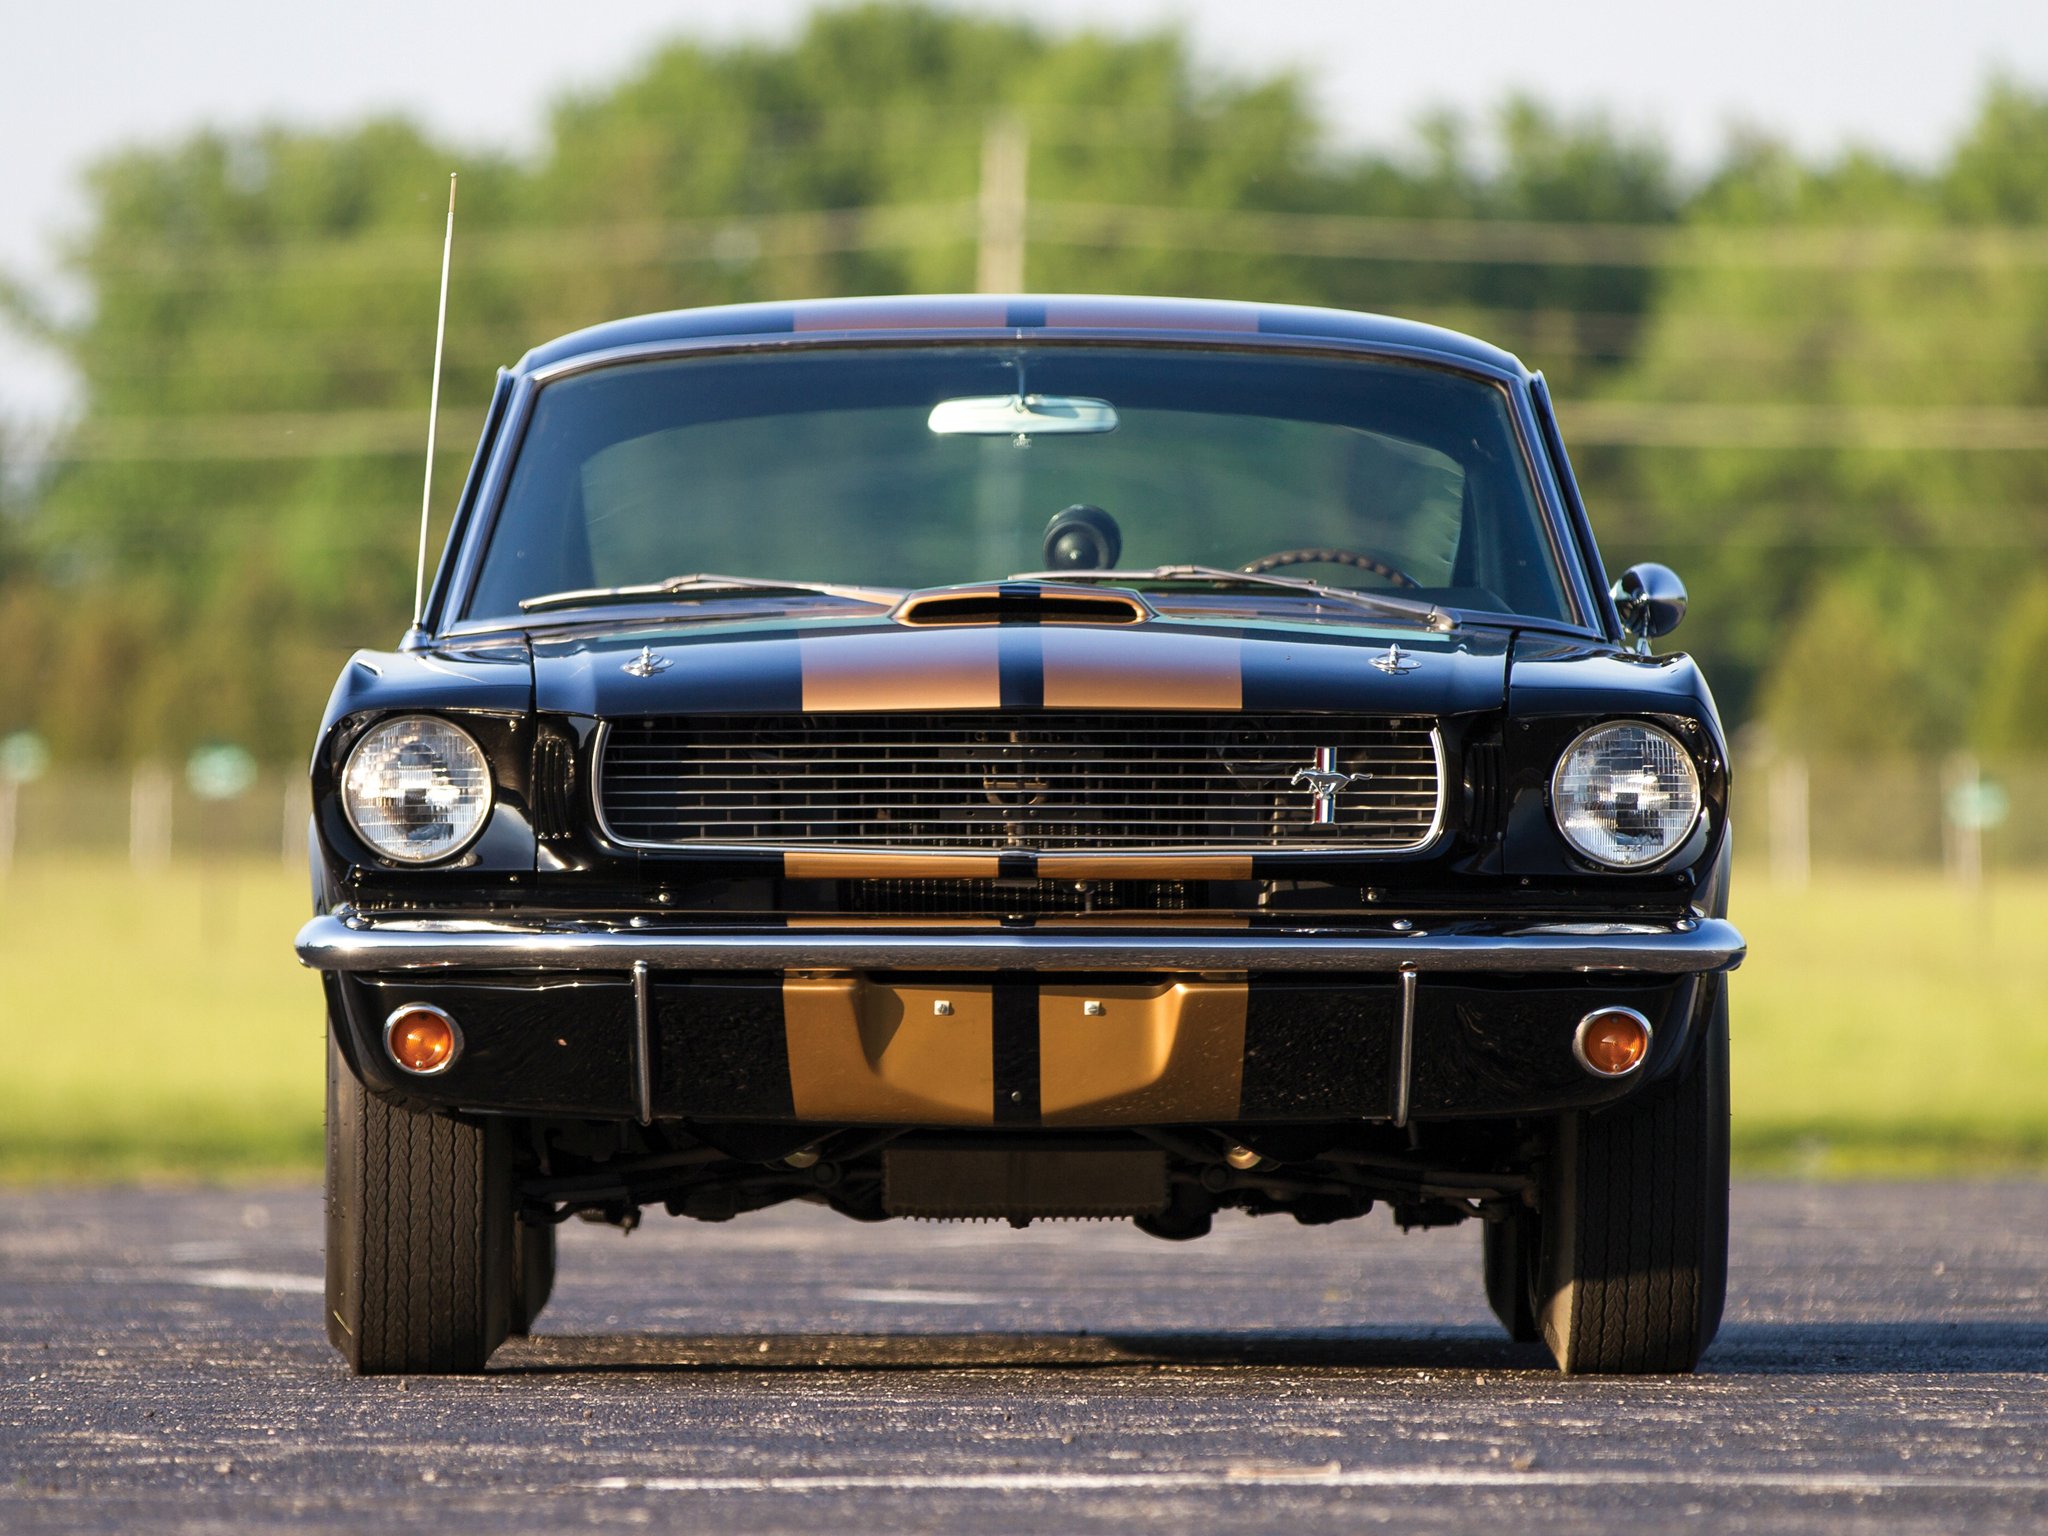 1966, Shelby, Gt350h, Supercharged, Ford, Mustang, Muscle, Classic Wallpaper